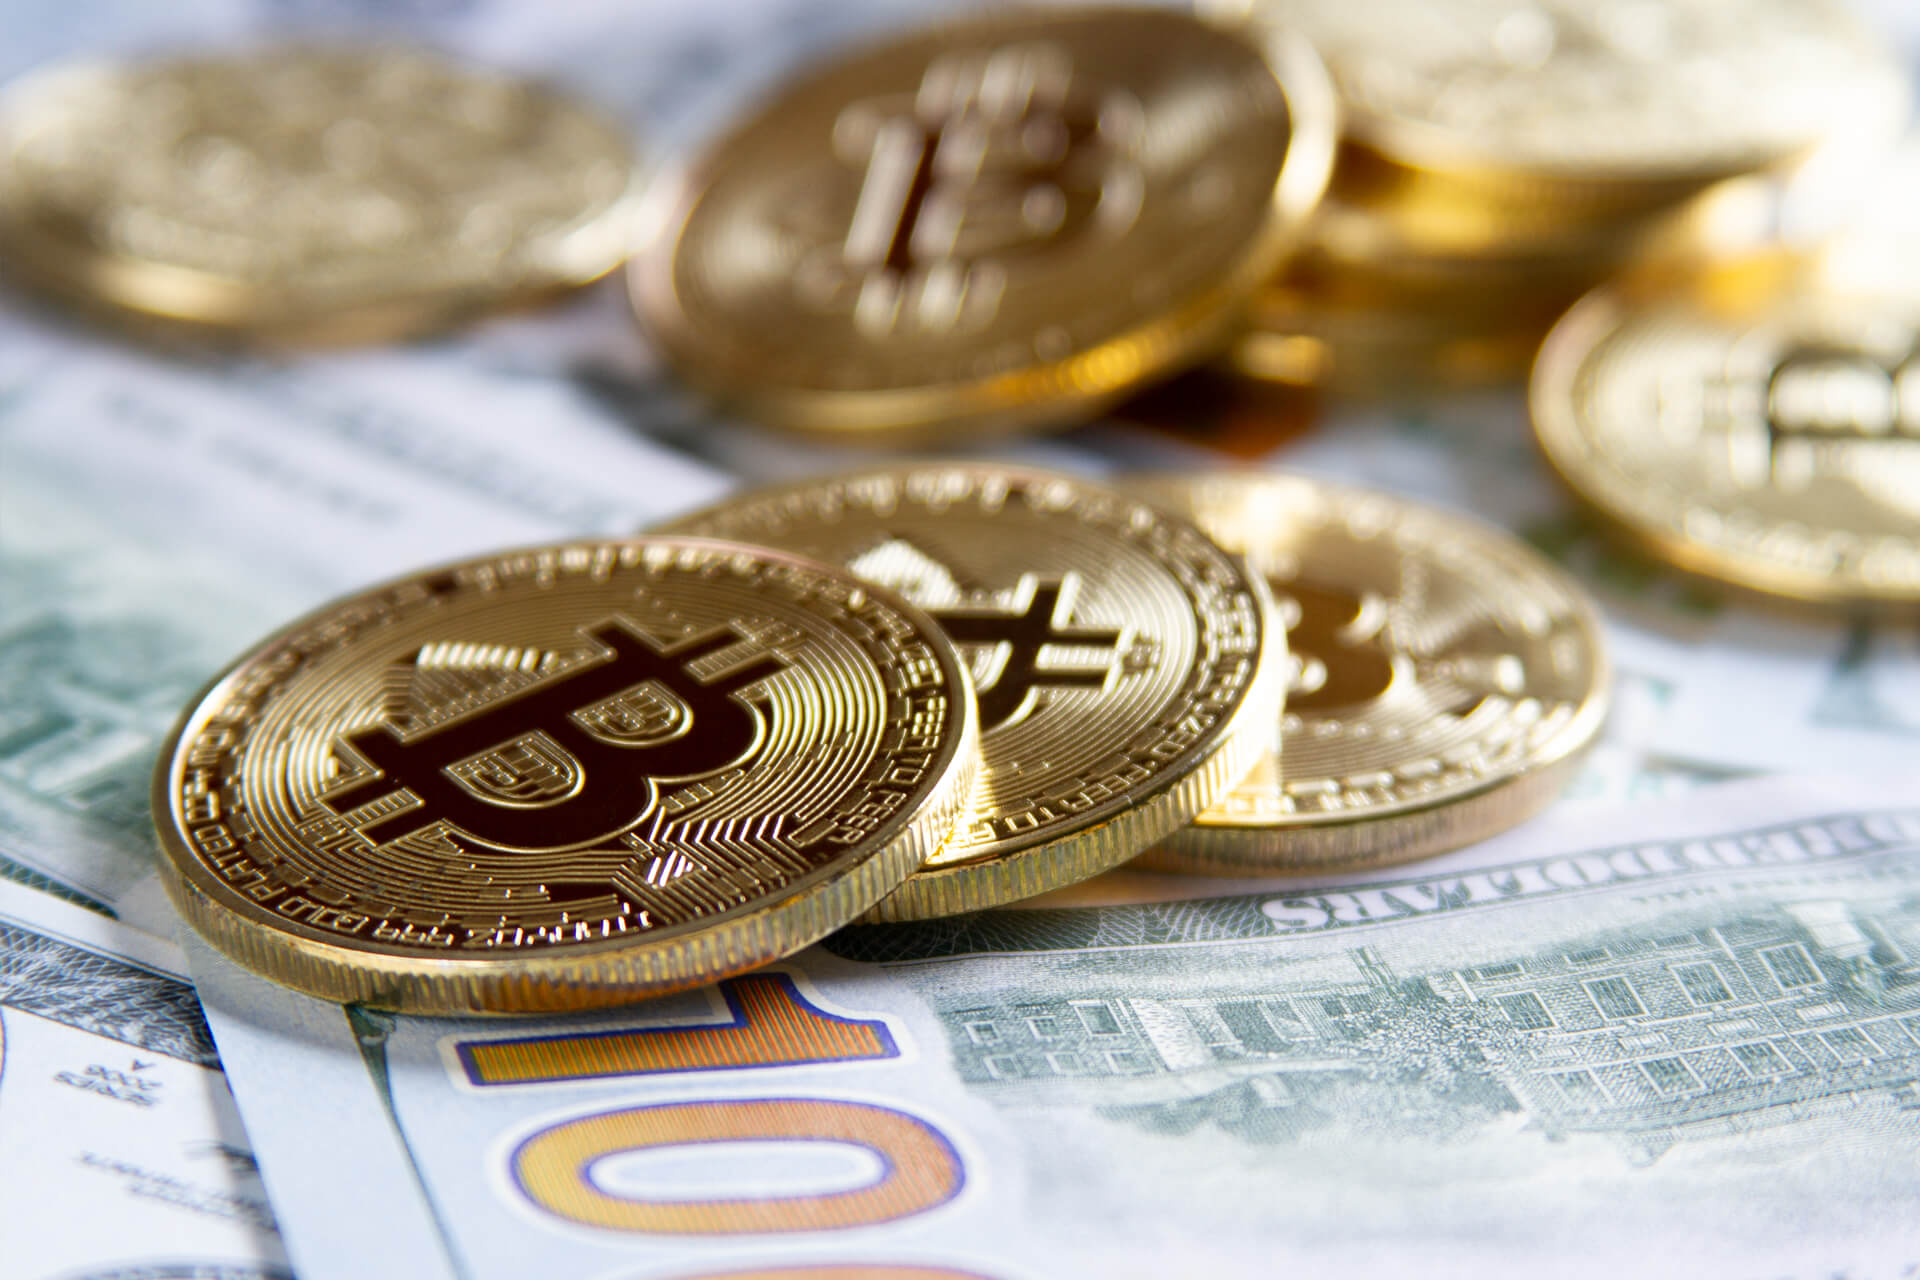 If I Buy 100 Dollars Worth Of Bitcoin : Bitcoin Prices Are Up Over $100 Already Today - CoinDesk ...